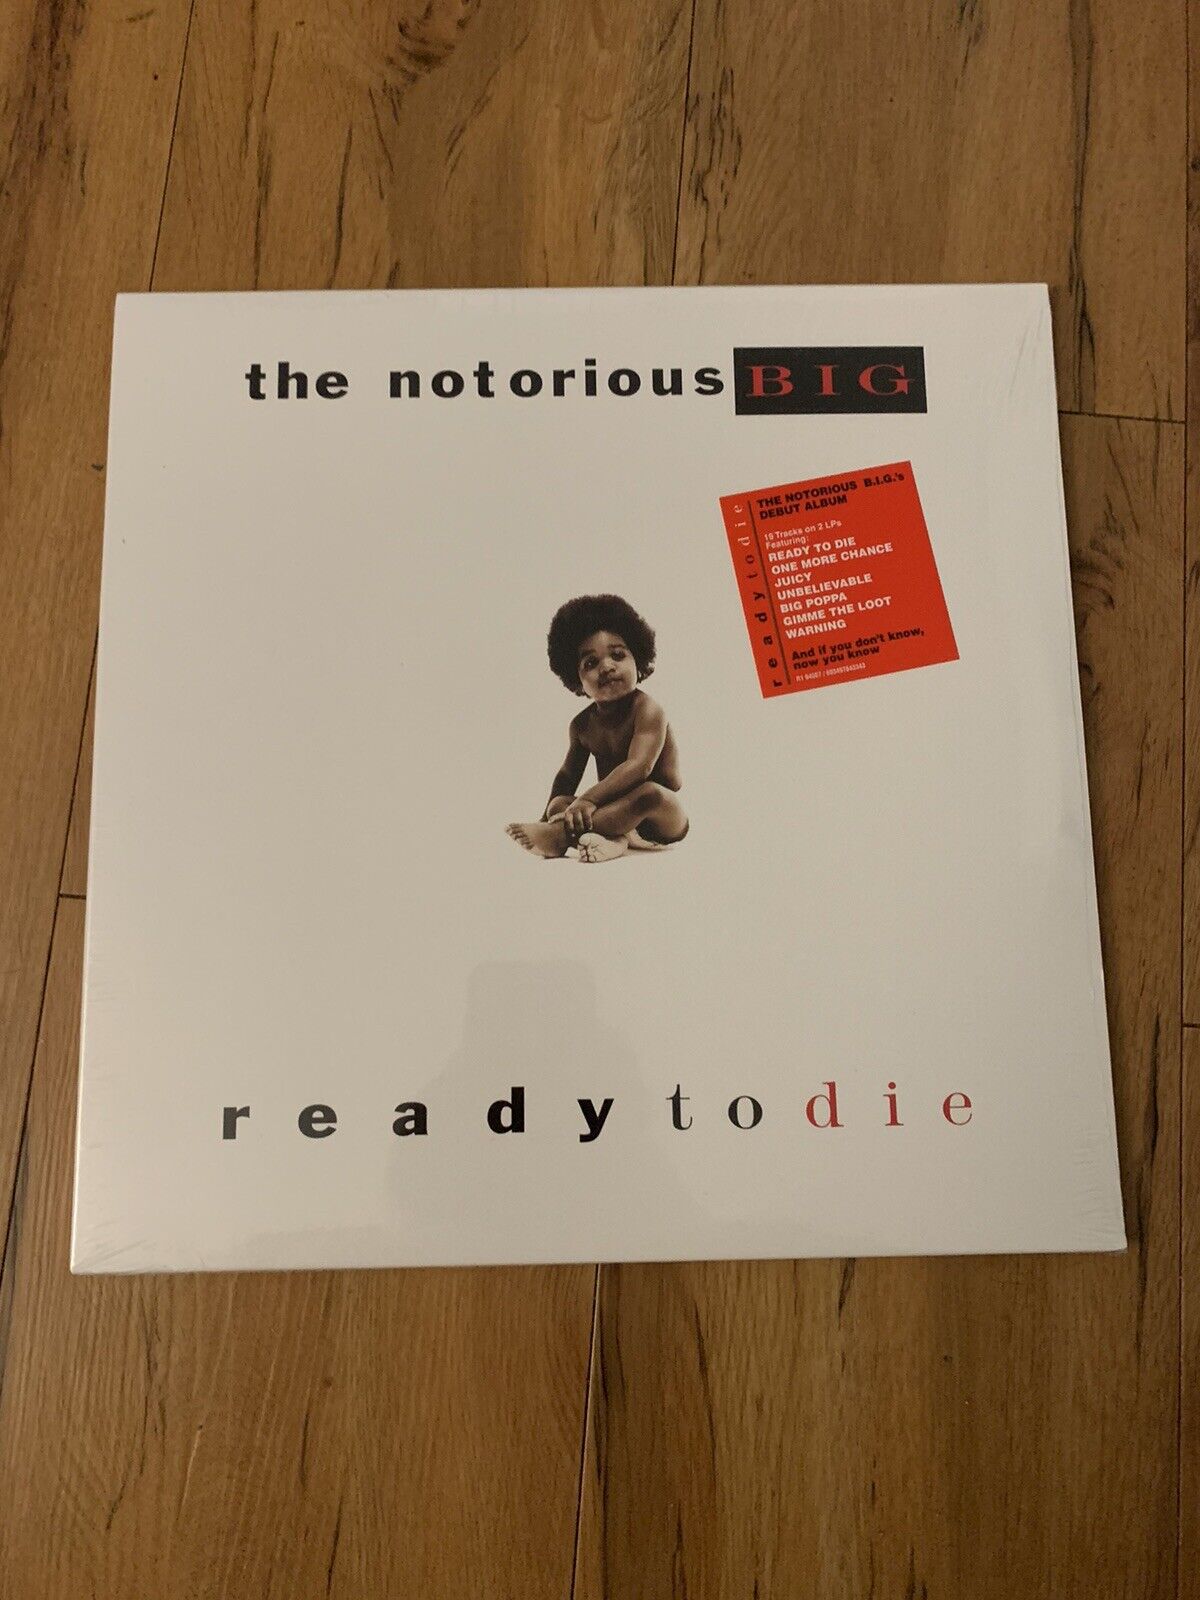 New & Sealed The Notorious B.I.G. "Ready To Die" 2-LP Vinyl Record